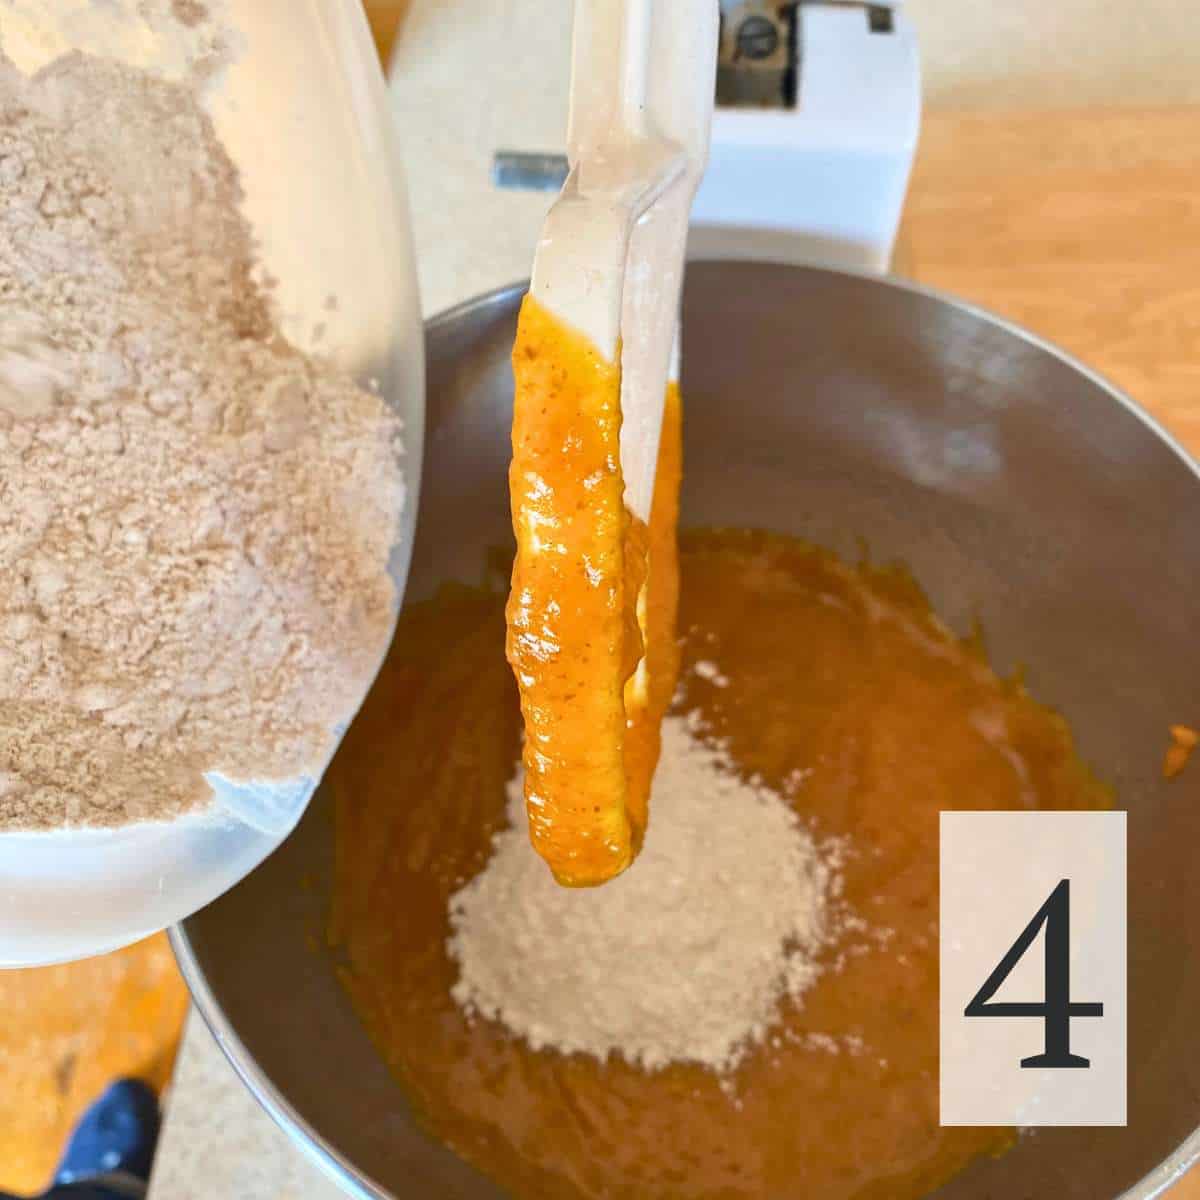 Gluten free flour mixture being added to the mixing bowl containing wet ingredients.